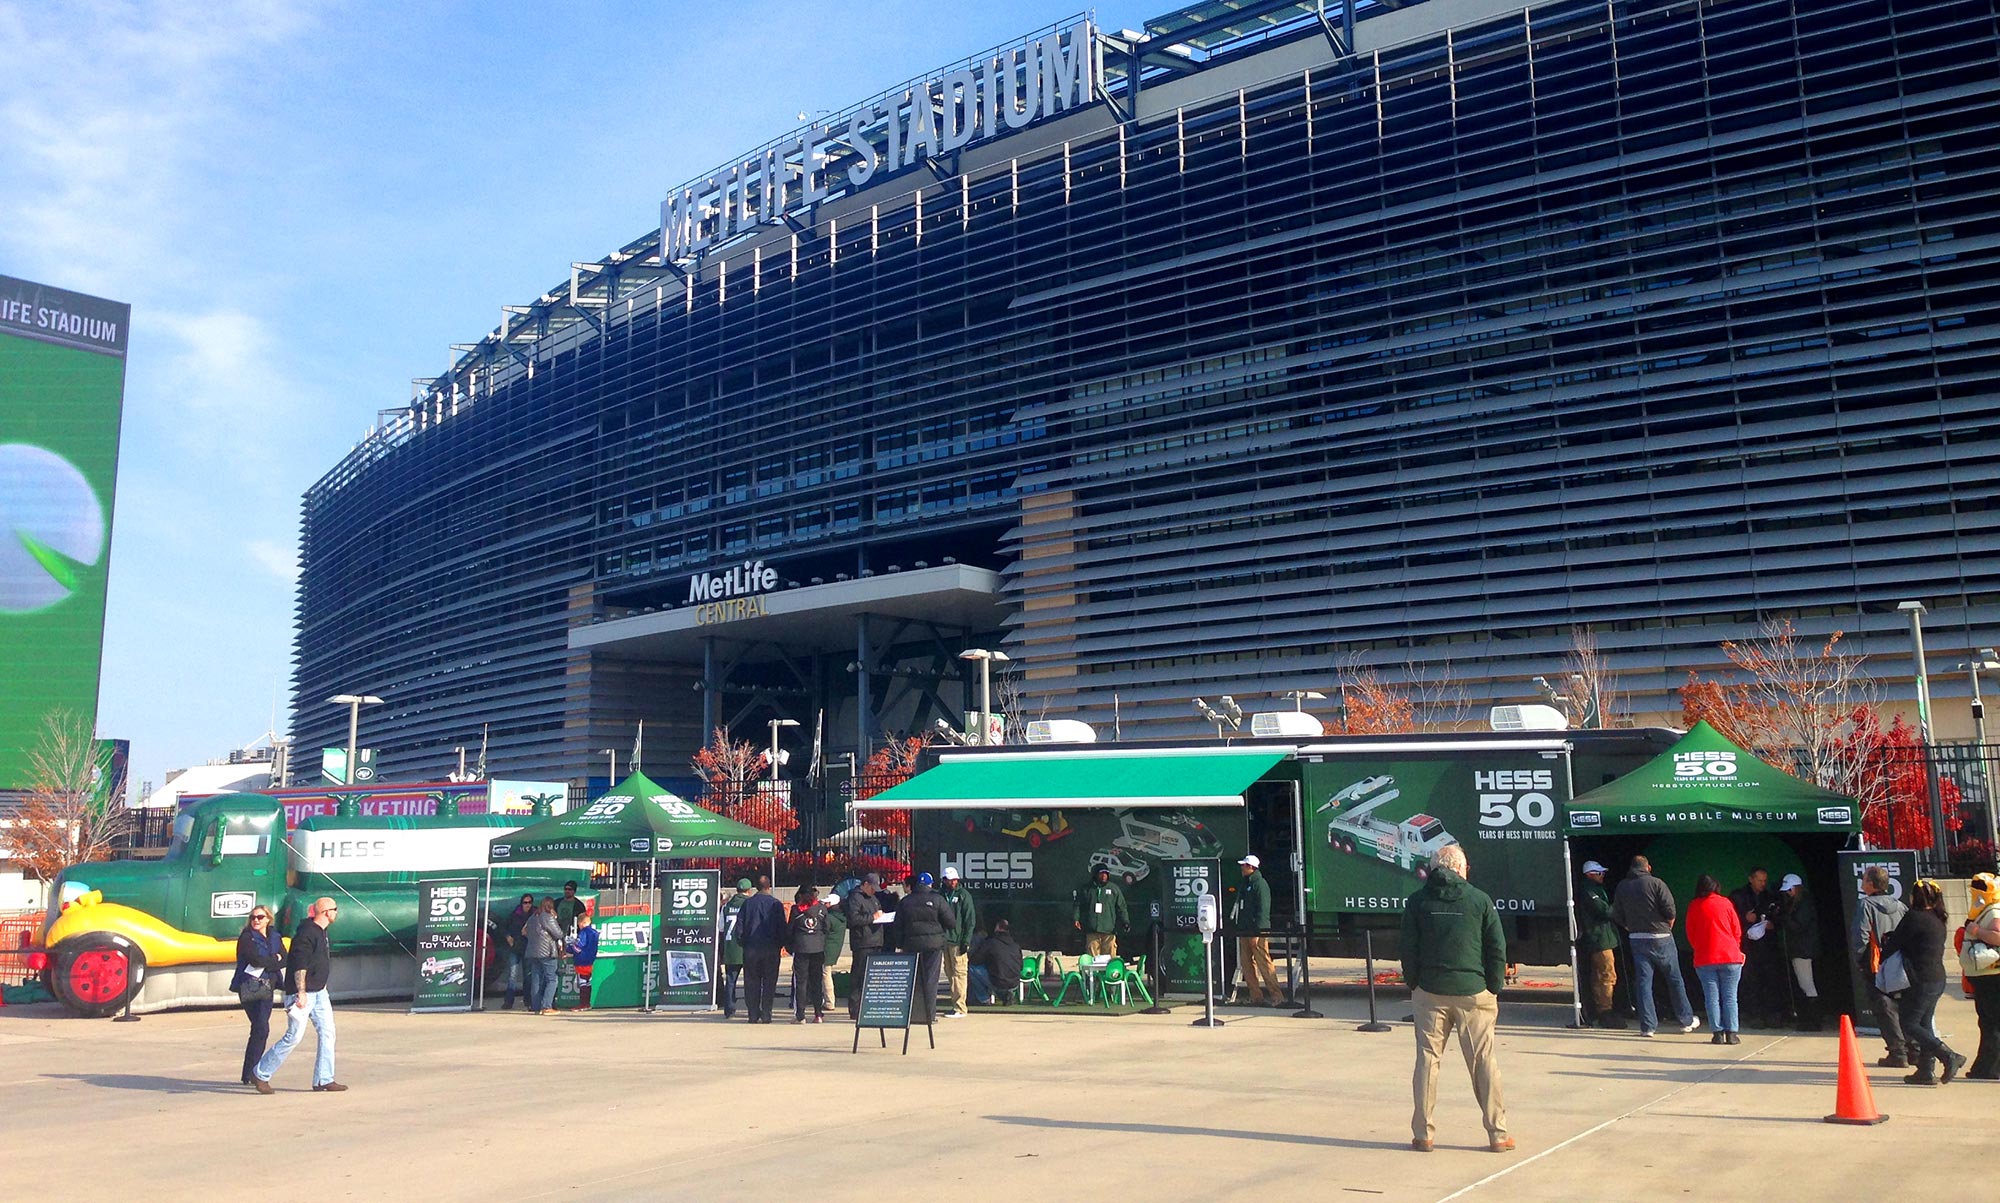 The mobile museum was far more than just an RV, with several external pieces set up at each stop. Pictured here at MetLife Stadium.